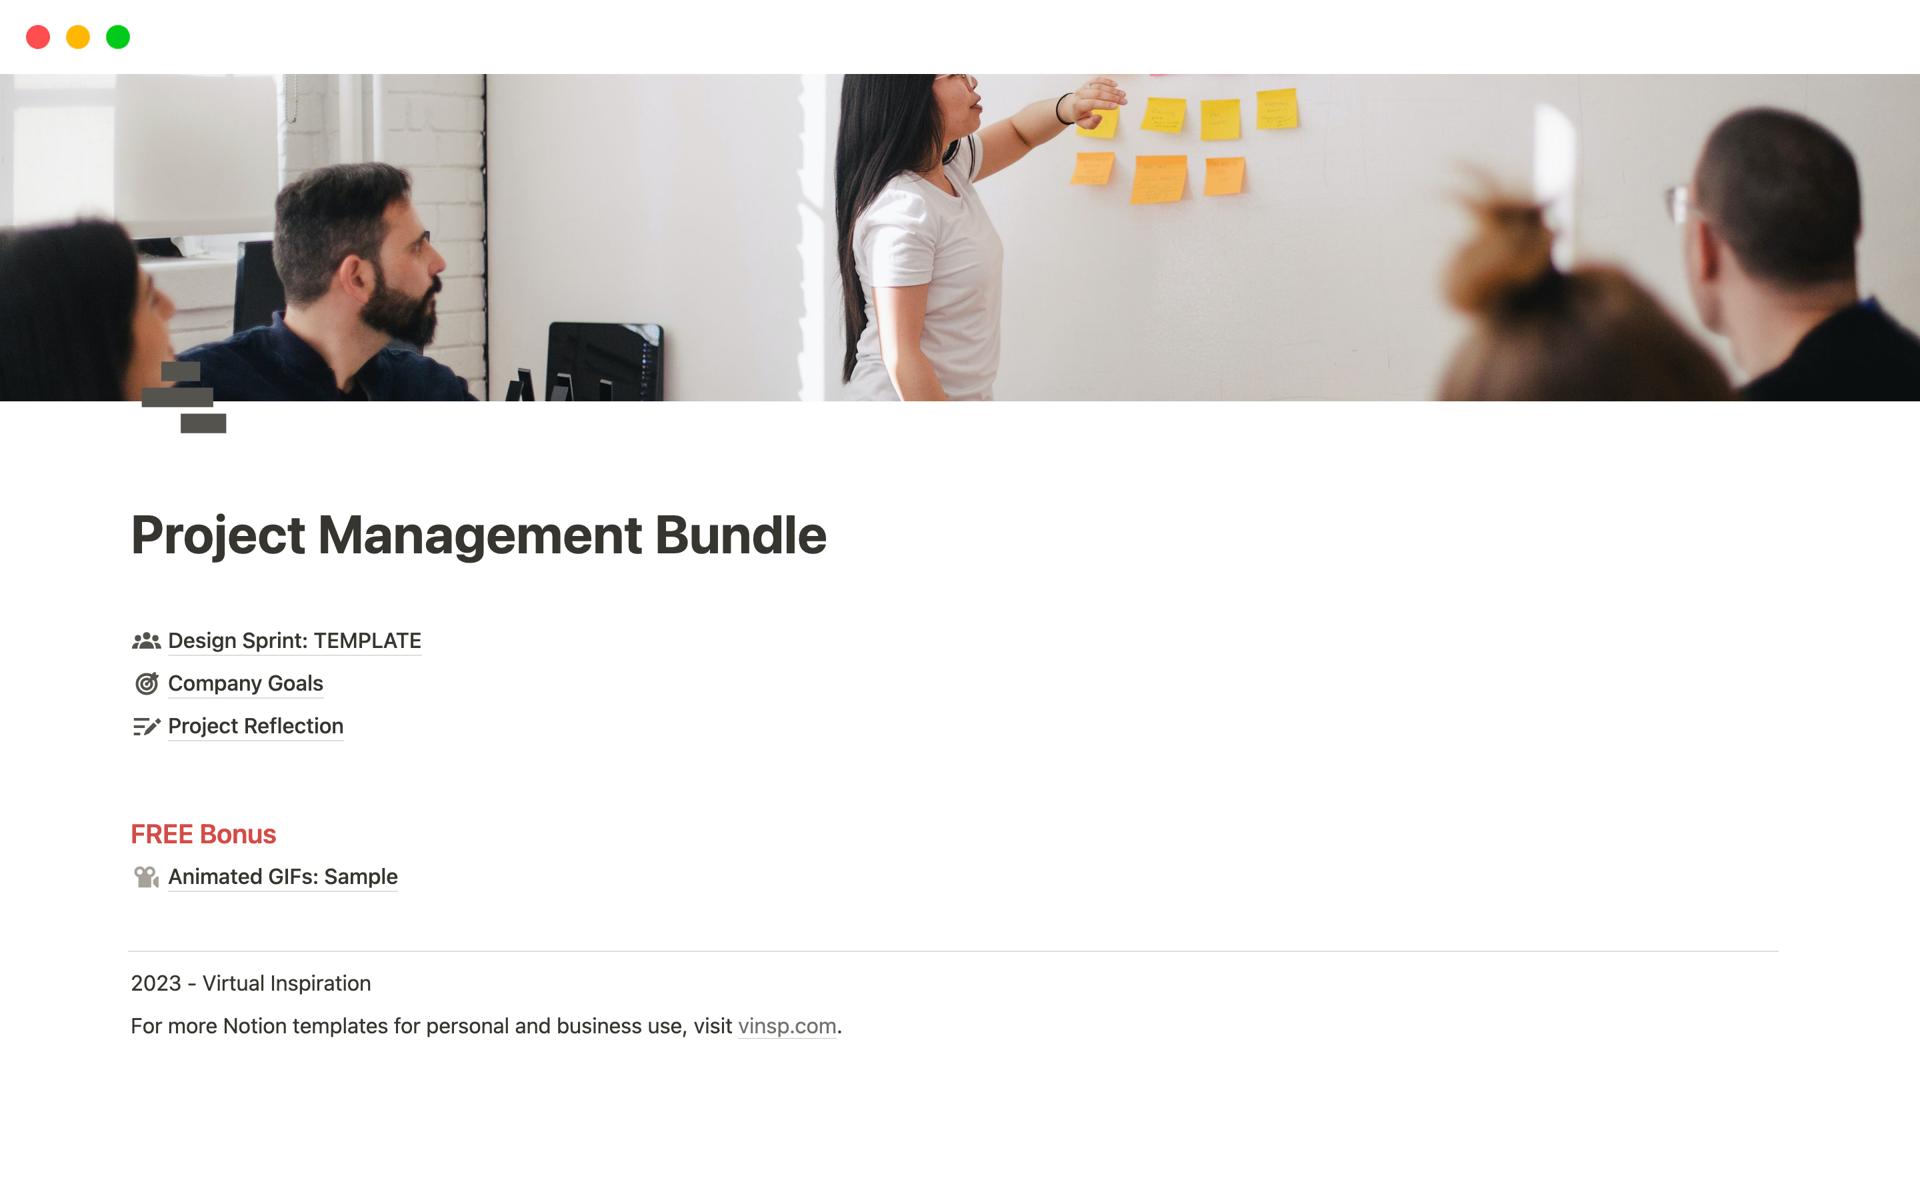 The Project Management Bundle Notion Template is an all-in-one package designed to enhance project efficiency, align company goals, and capitalize on project reflections.